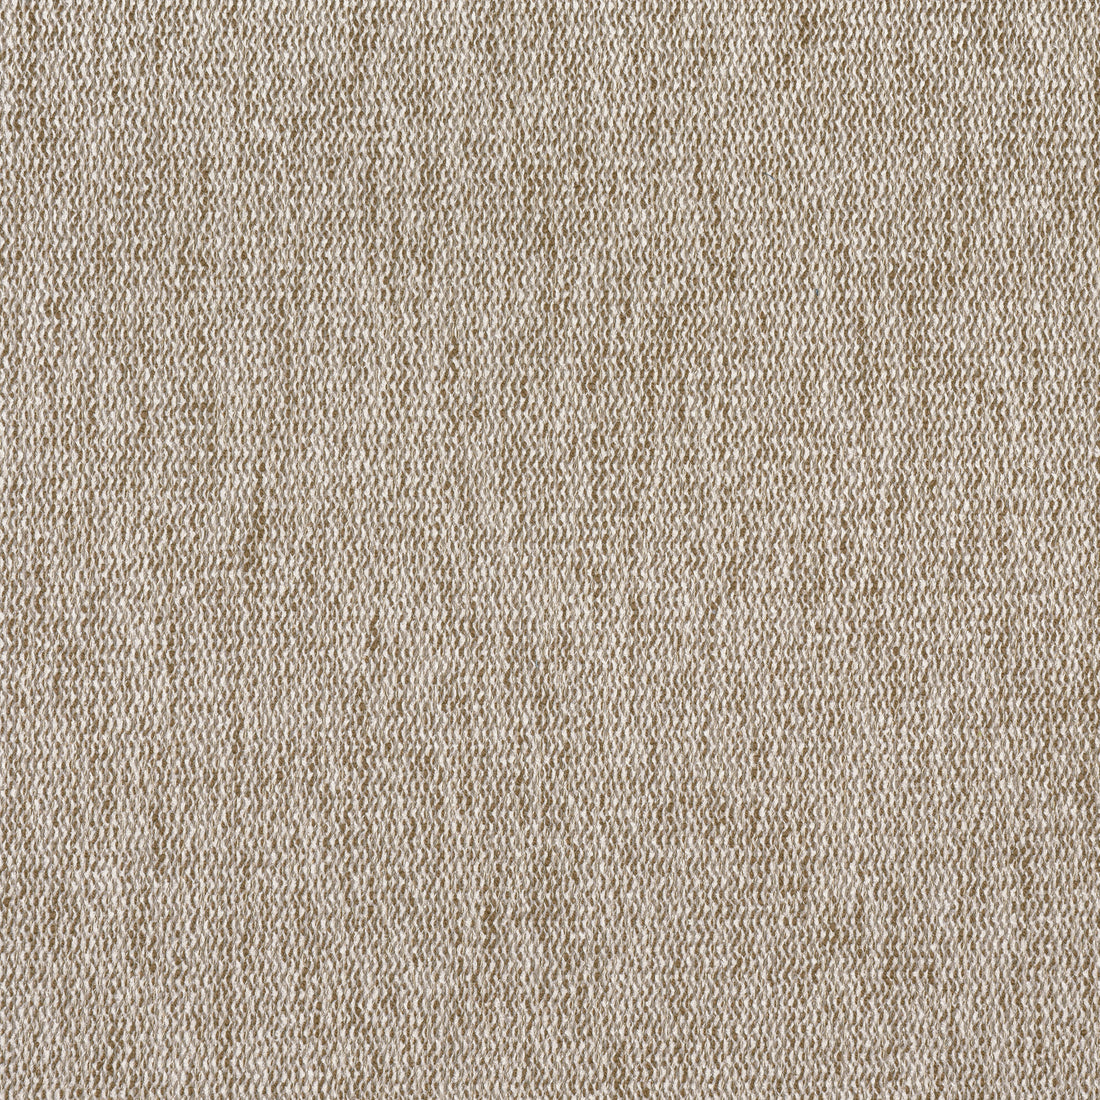 Arroyo fabric in latte color - pattern number W8782 - by Thibaut in the Haven Textures collection